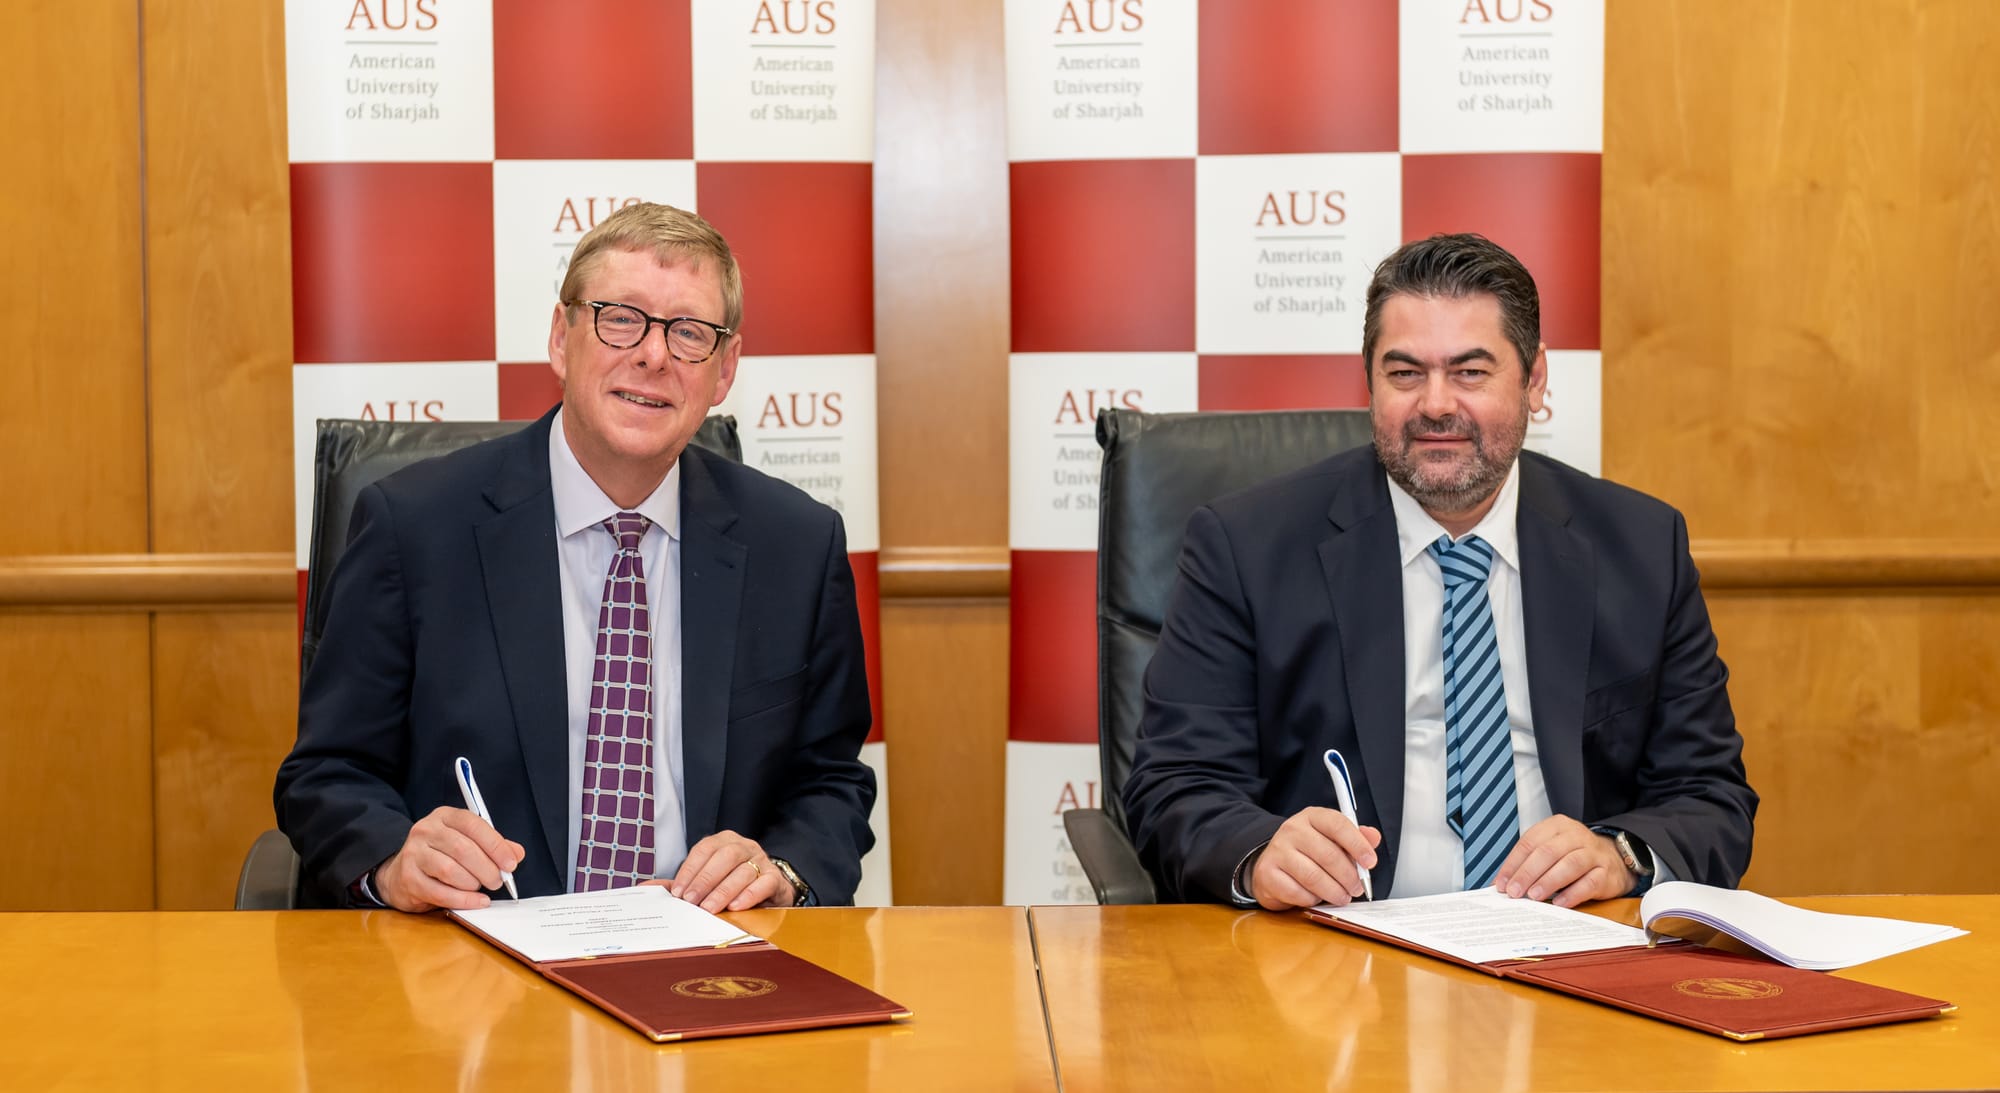 Dr. Tod Alan Laursen, Chancellor of AUS, and Dr. Greg Siourounis, Managing Director of the Sui Foundation, signing documents